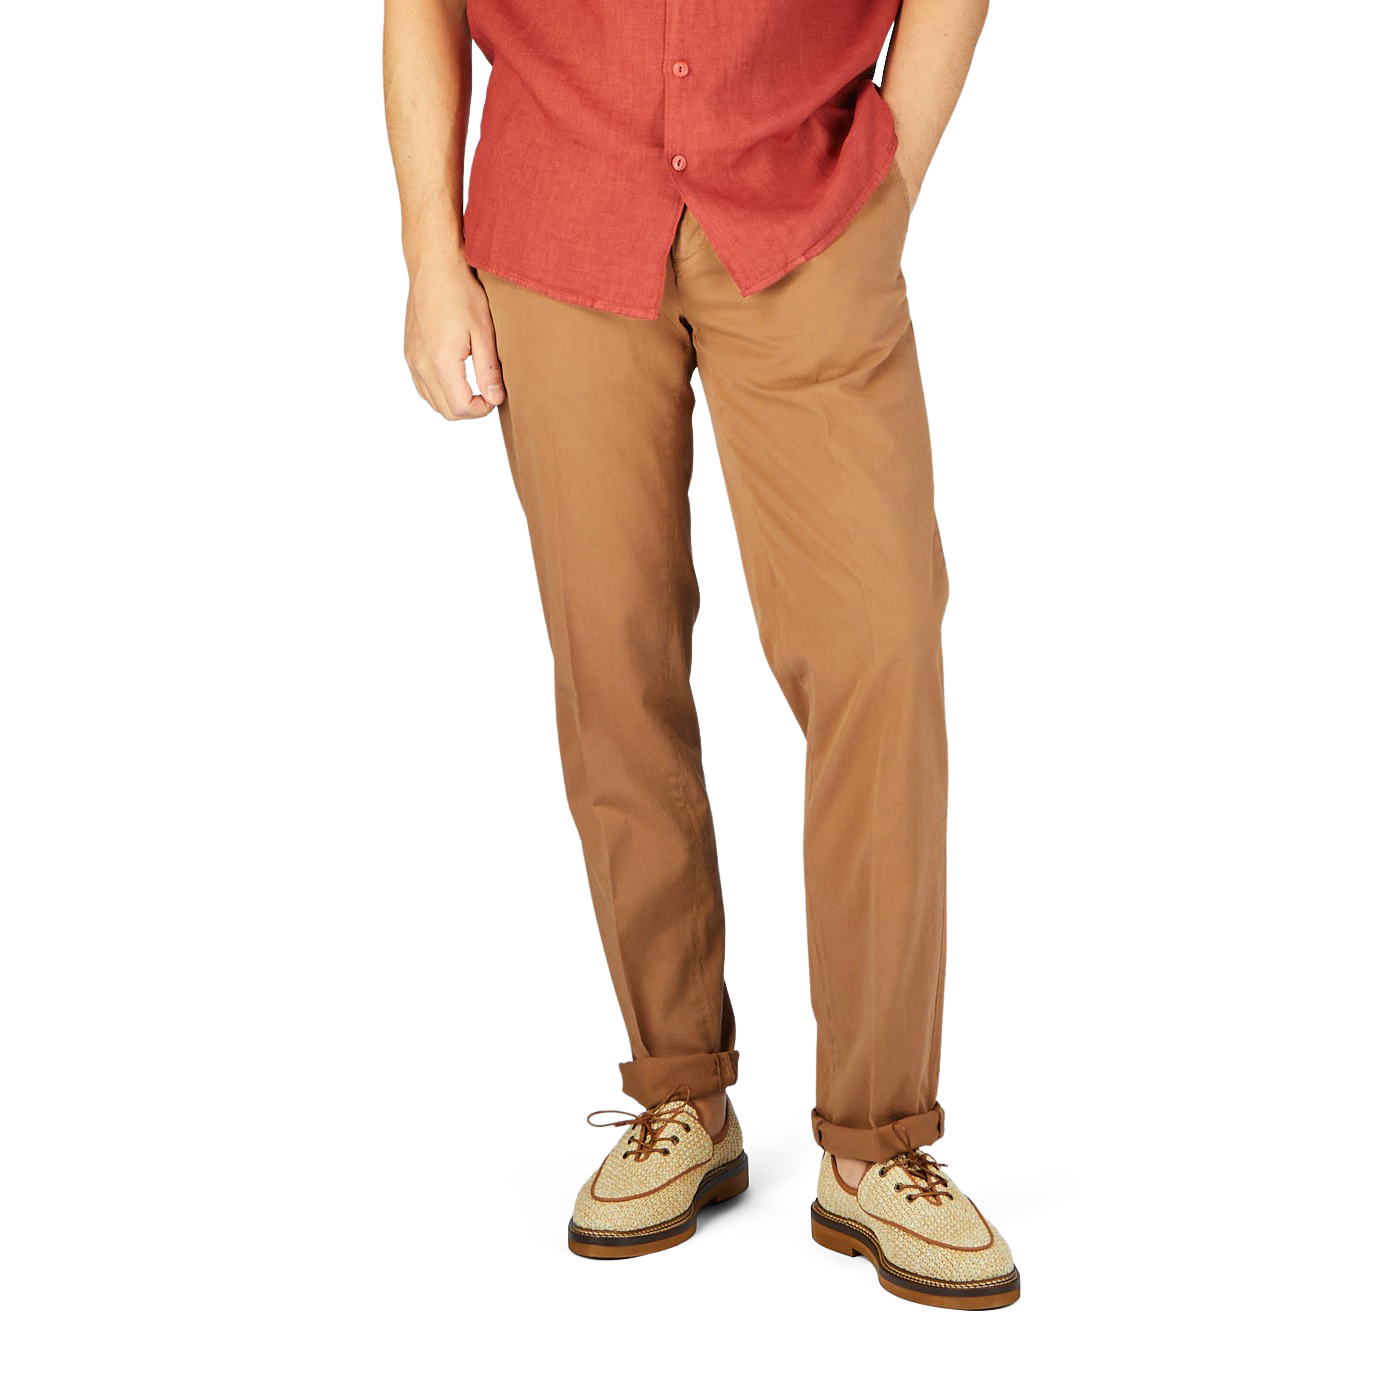 A man in a red shirt and Canali terracotta cotton stretch flat front chinos.